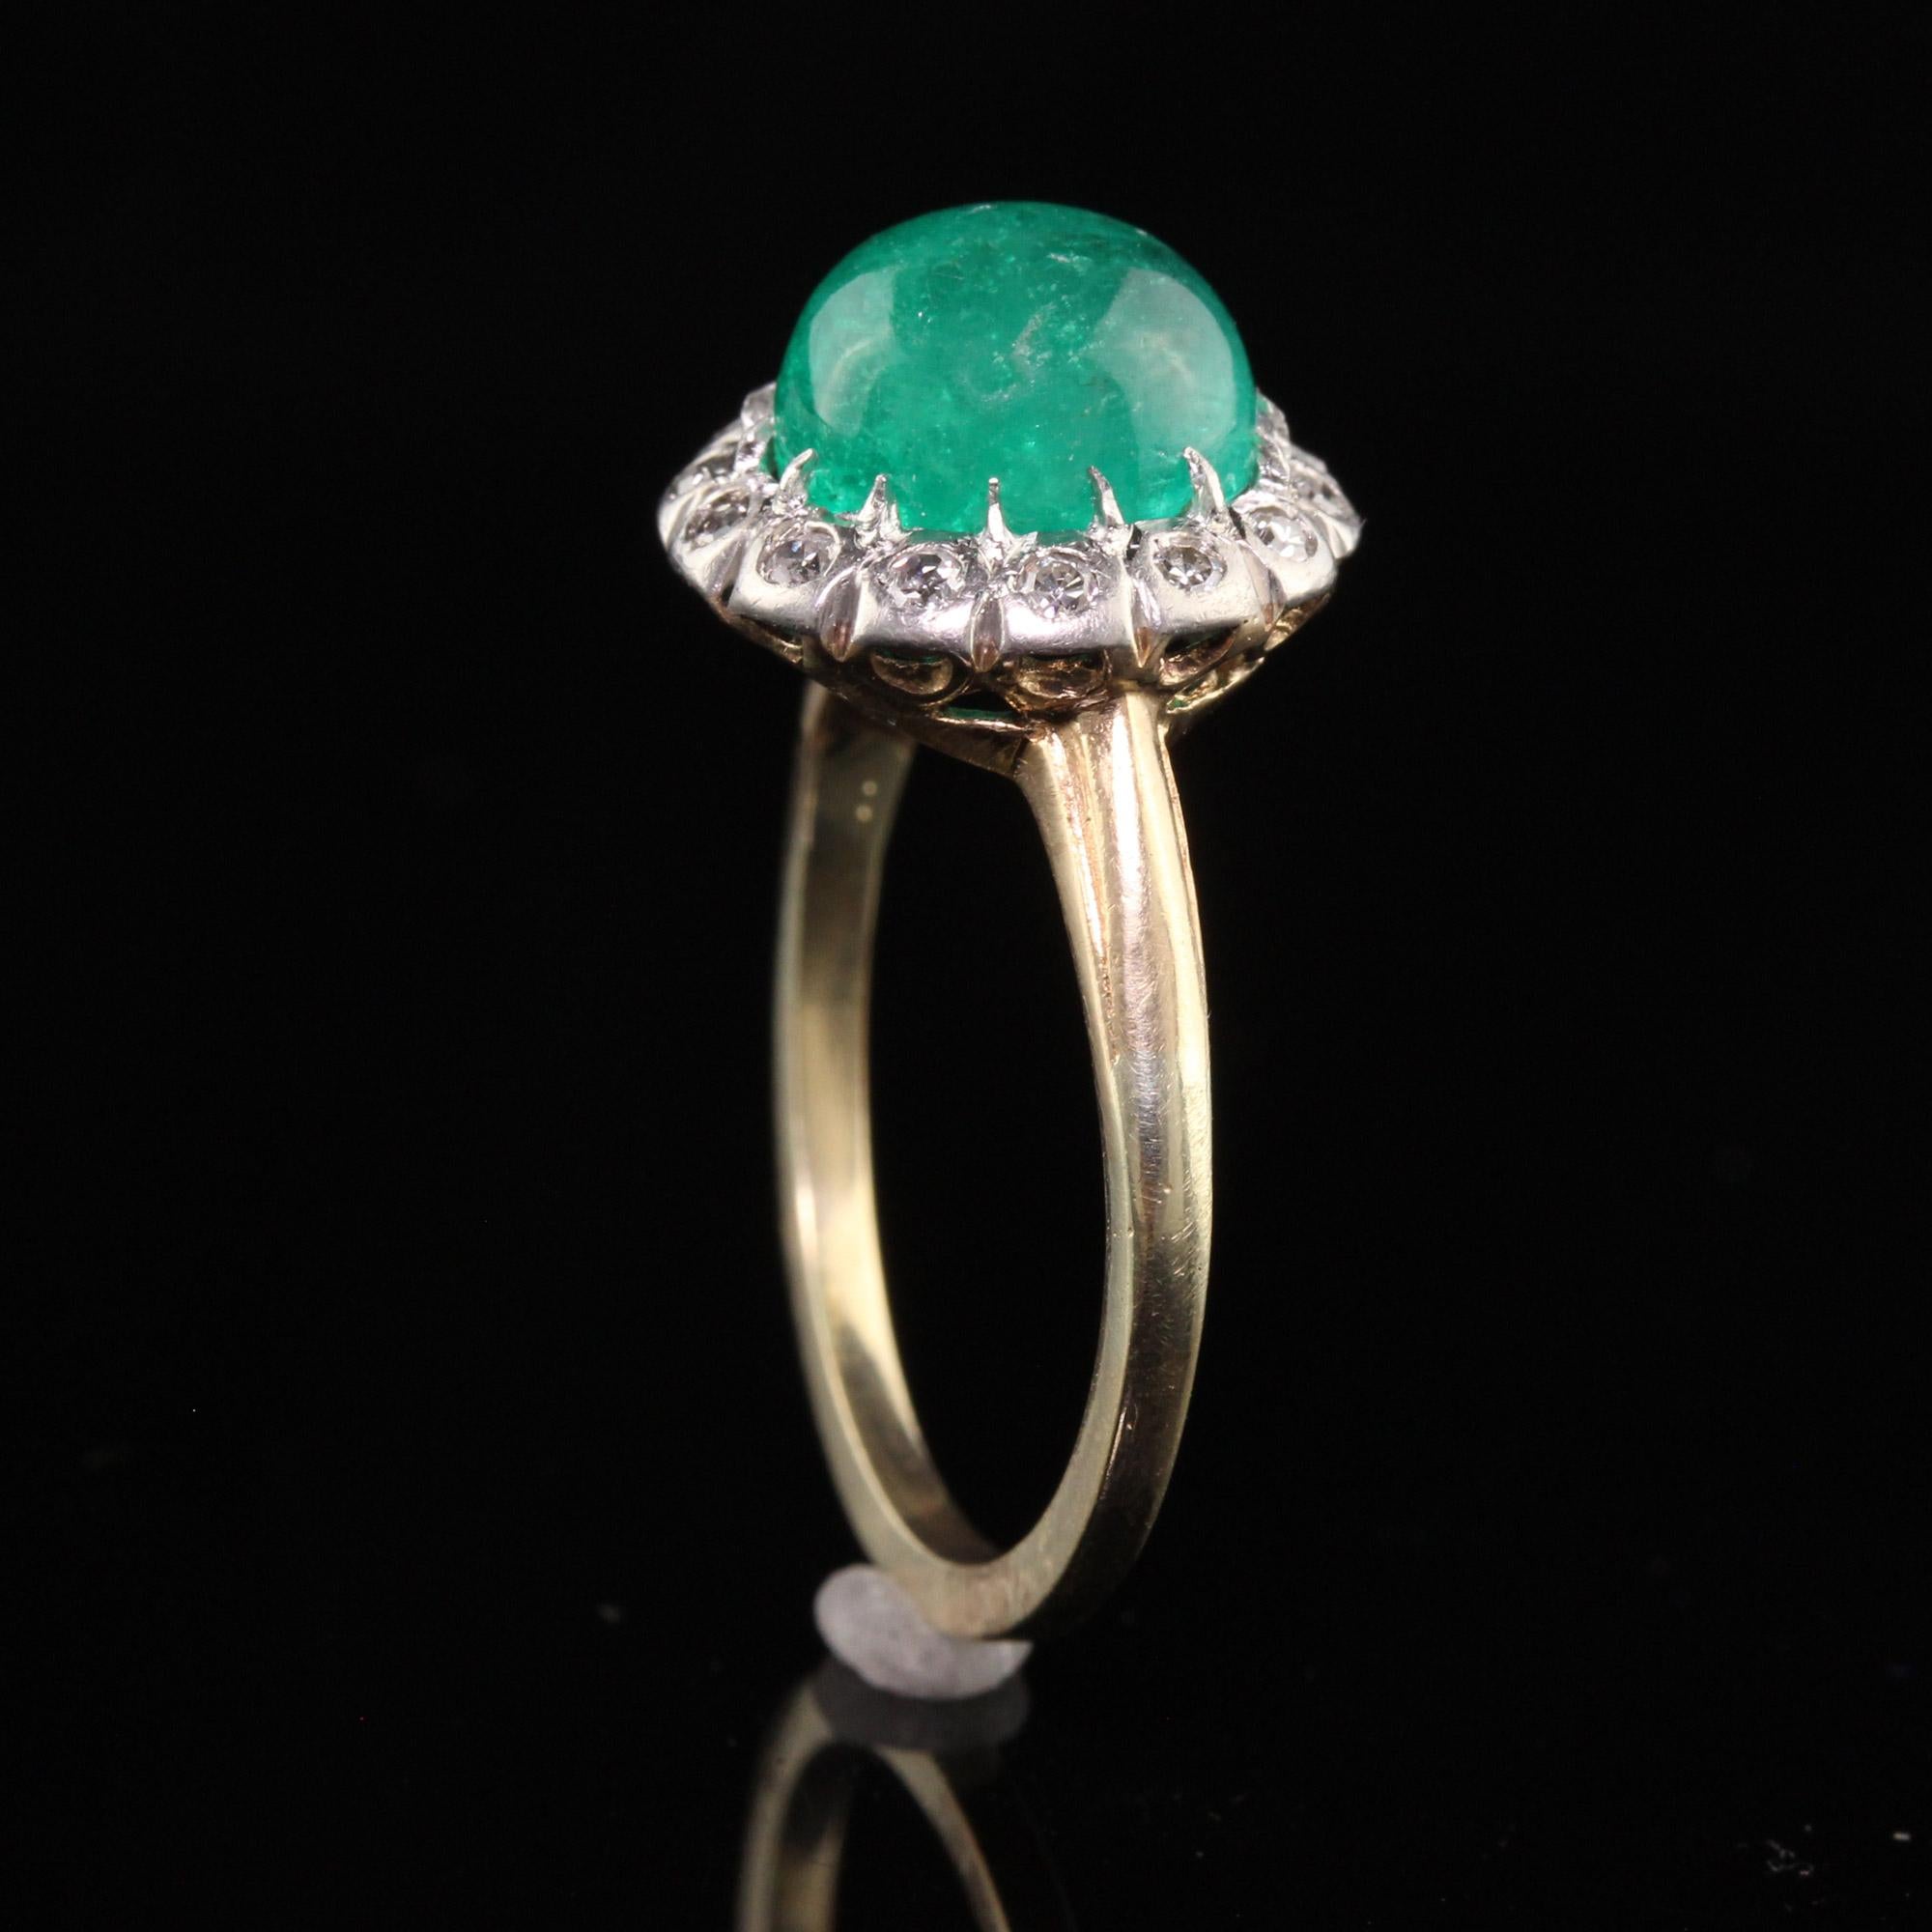 Cabochon Antique Edwardian 14K Yellow Gold Platinum Top Colombian Emerald Engagement Ring